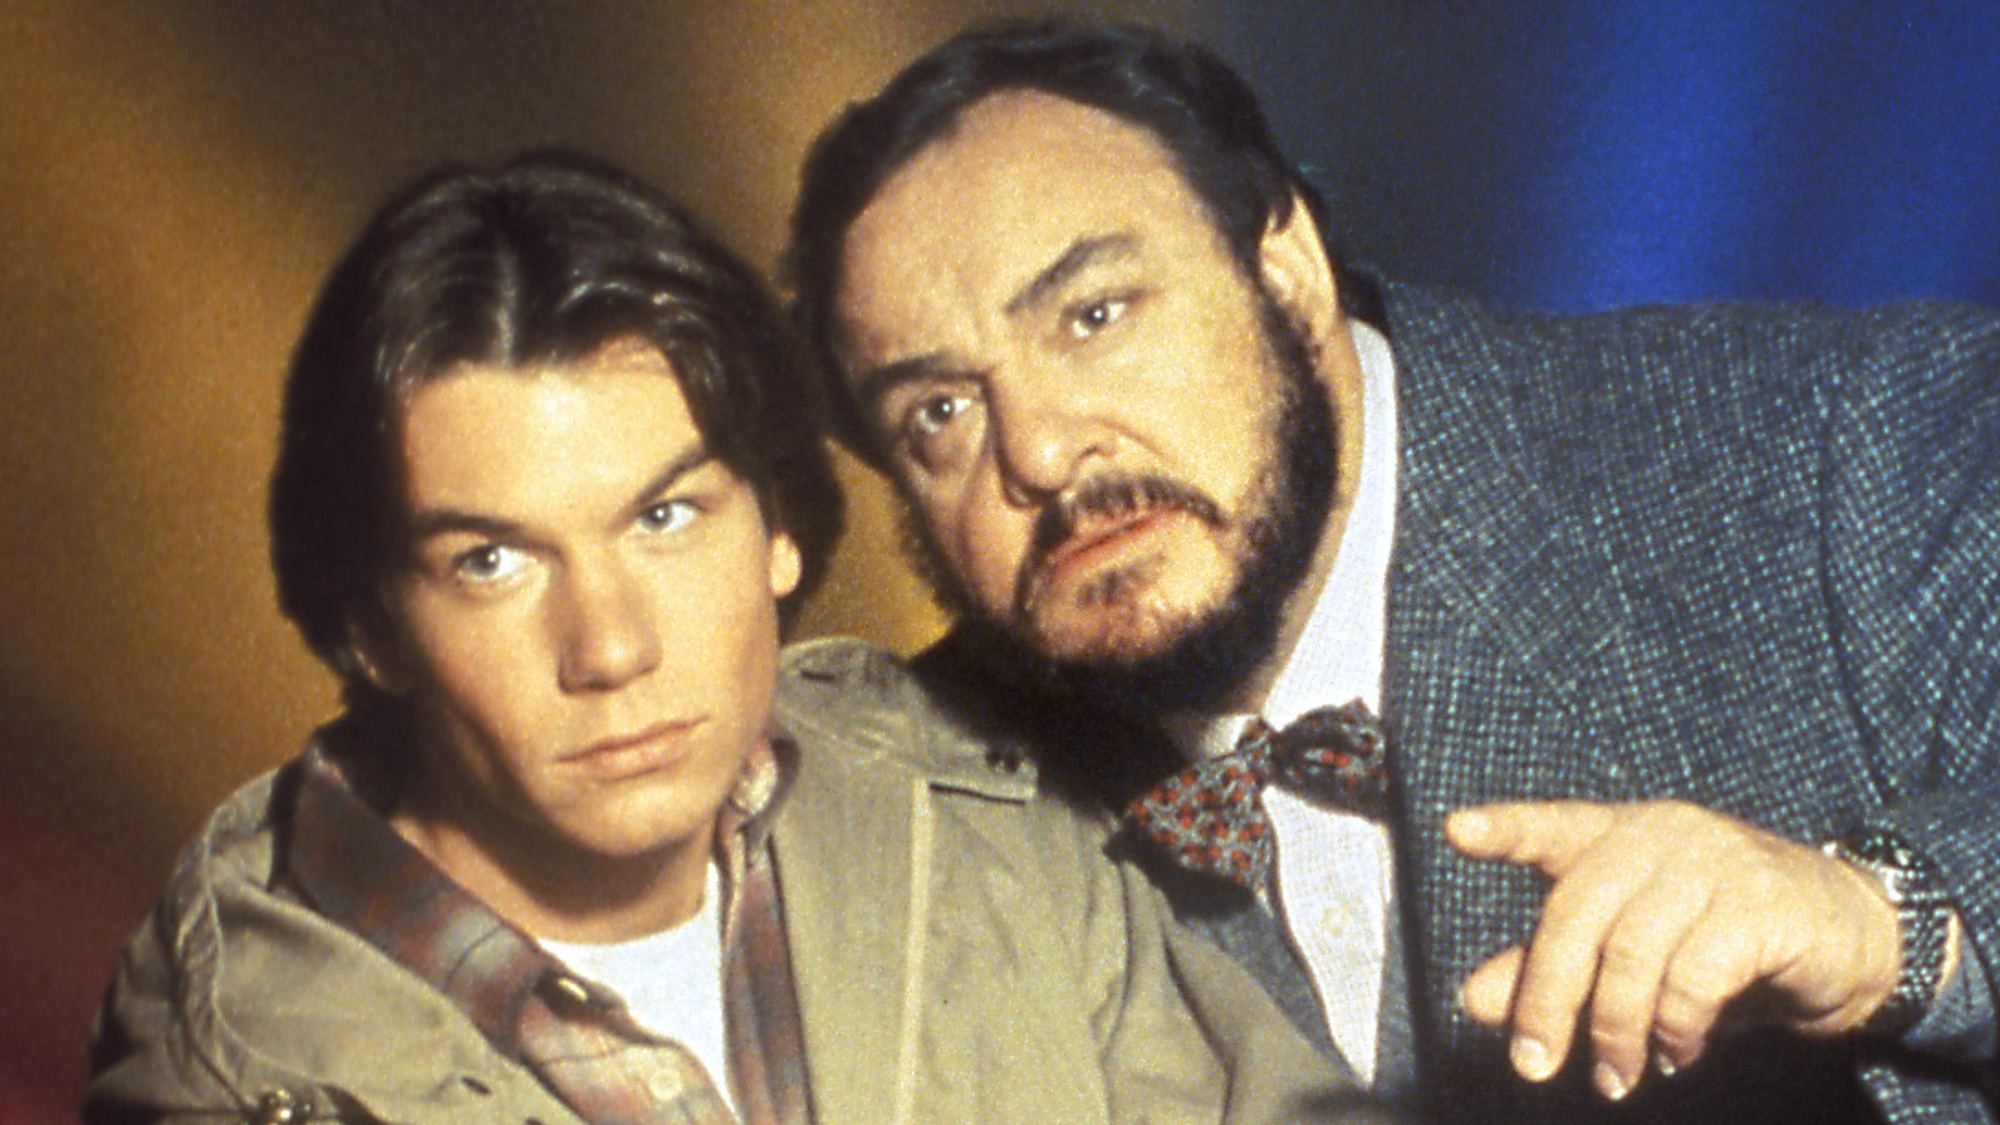 Jerry O'Connell and John Rhys-Davies in Sliders